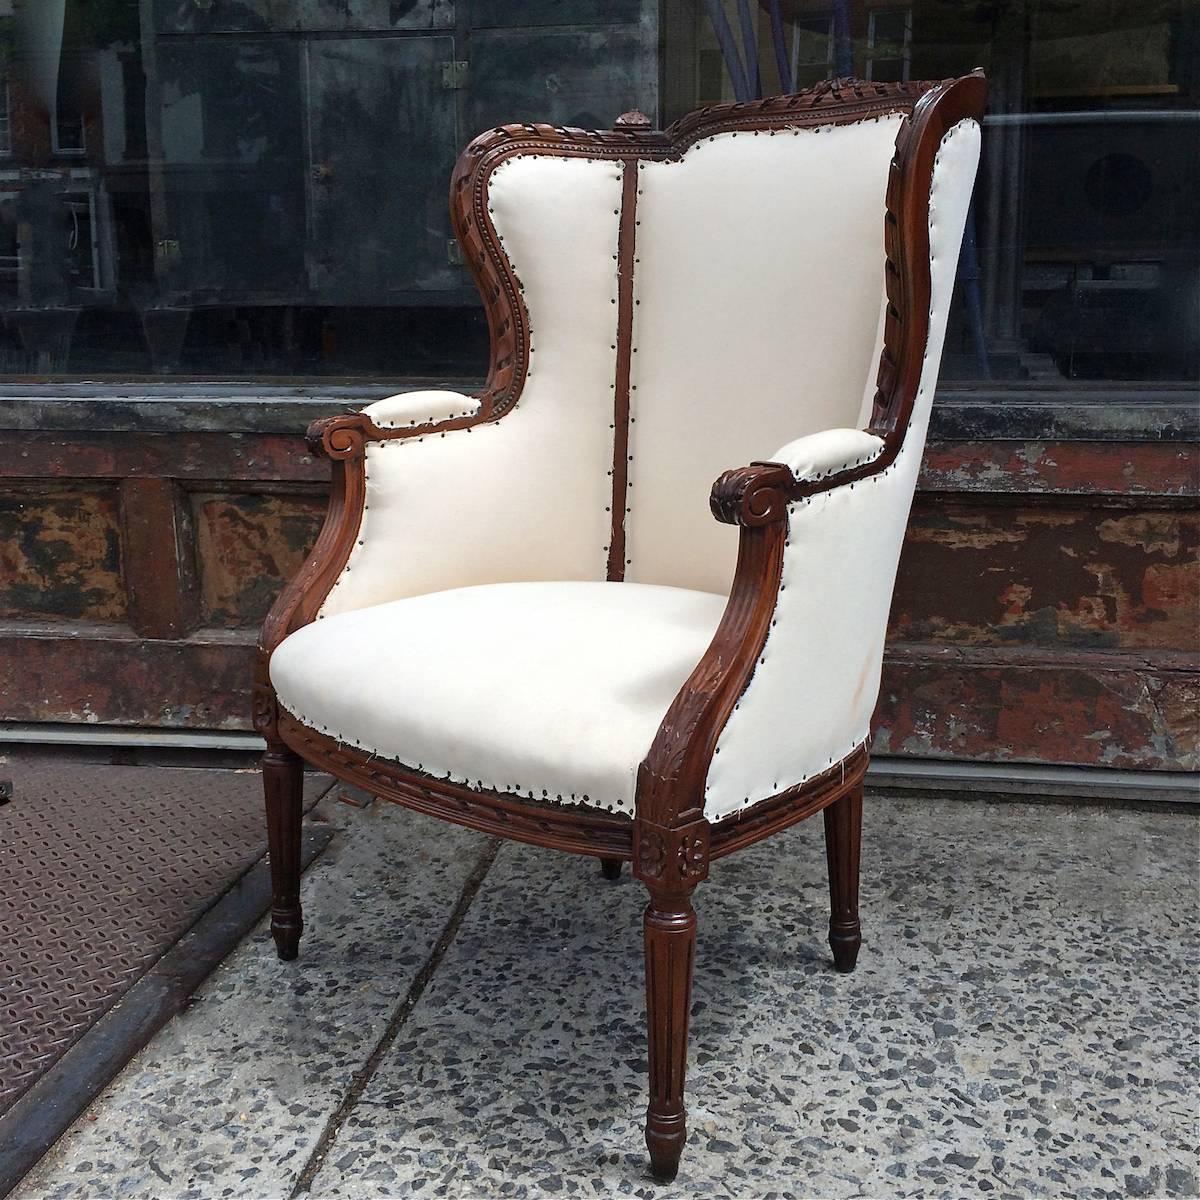 High, wingback armchair in an Edwardian style with ornately carved mahogany frame and muslin upholstery. We can offer upholstery for an additional $400.